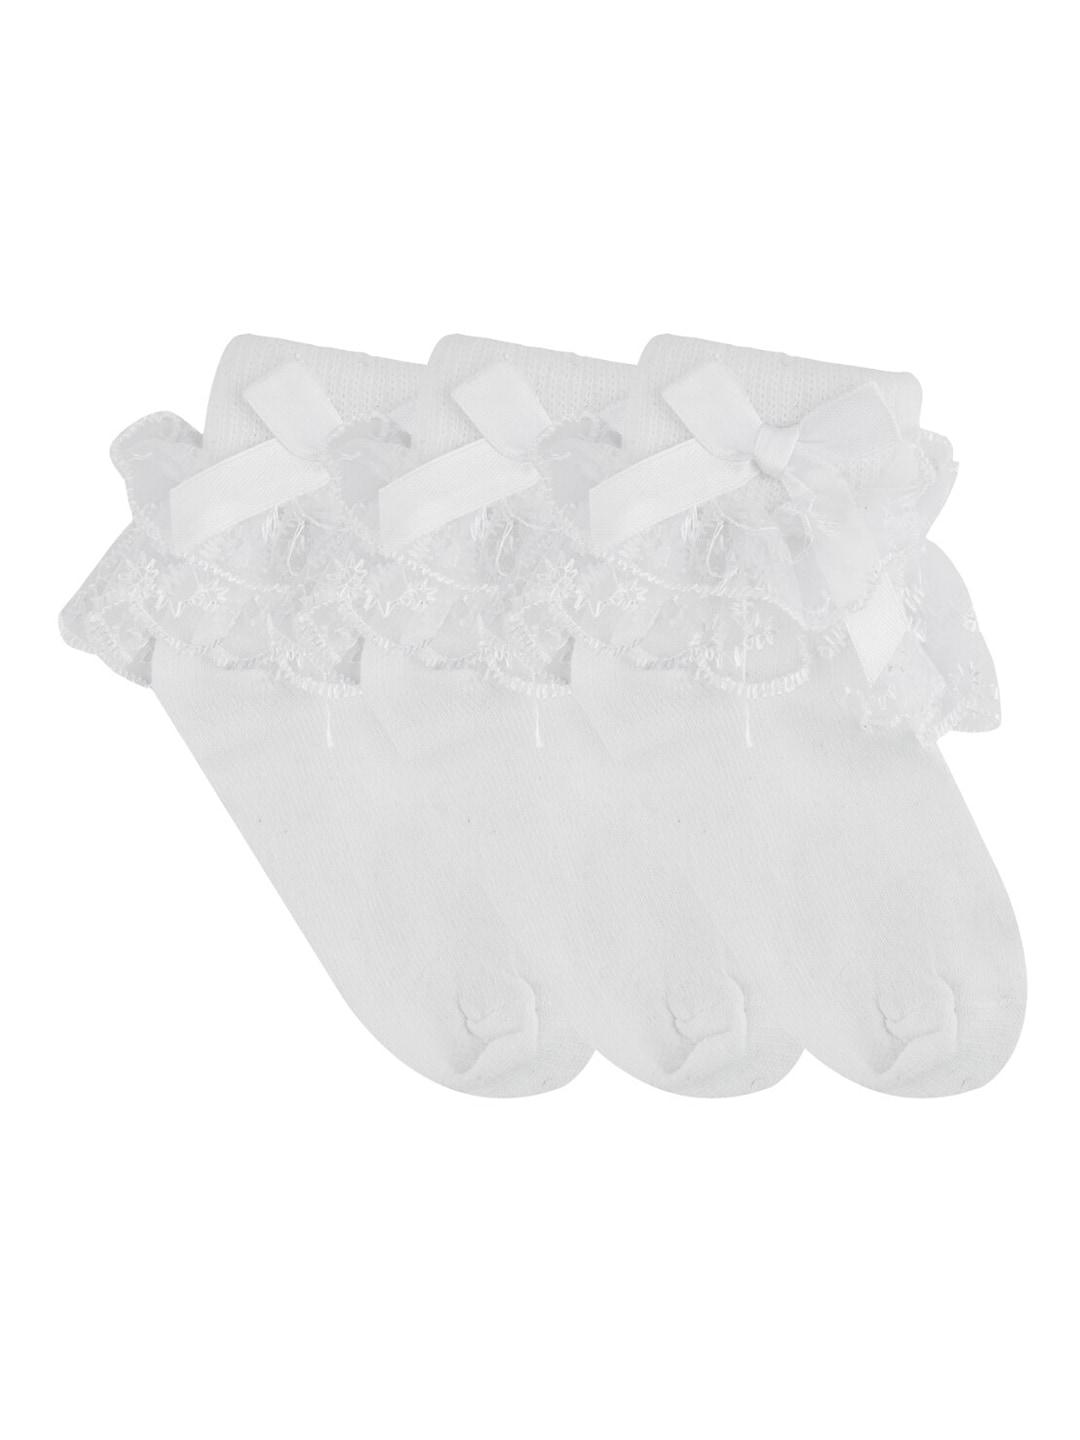 n2s next2skin infant girls pack of 3 assorted super combed cotton above ankle-length socks